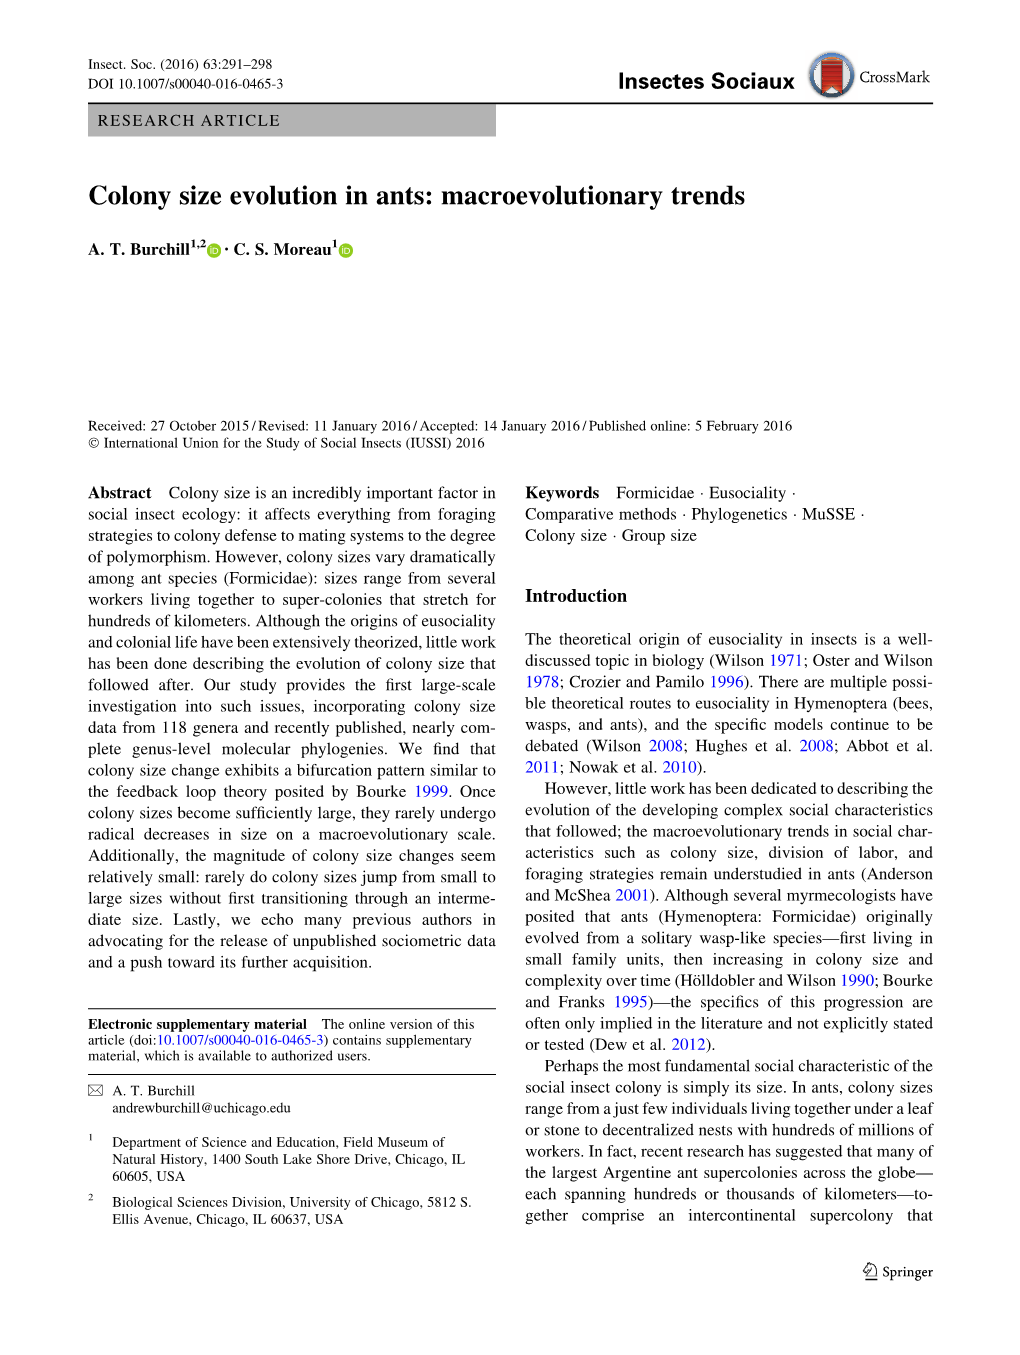 Colony Size Evolution in Ants: Macroevolutionary Trends